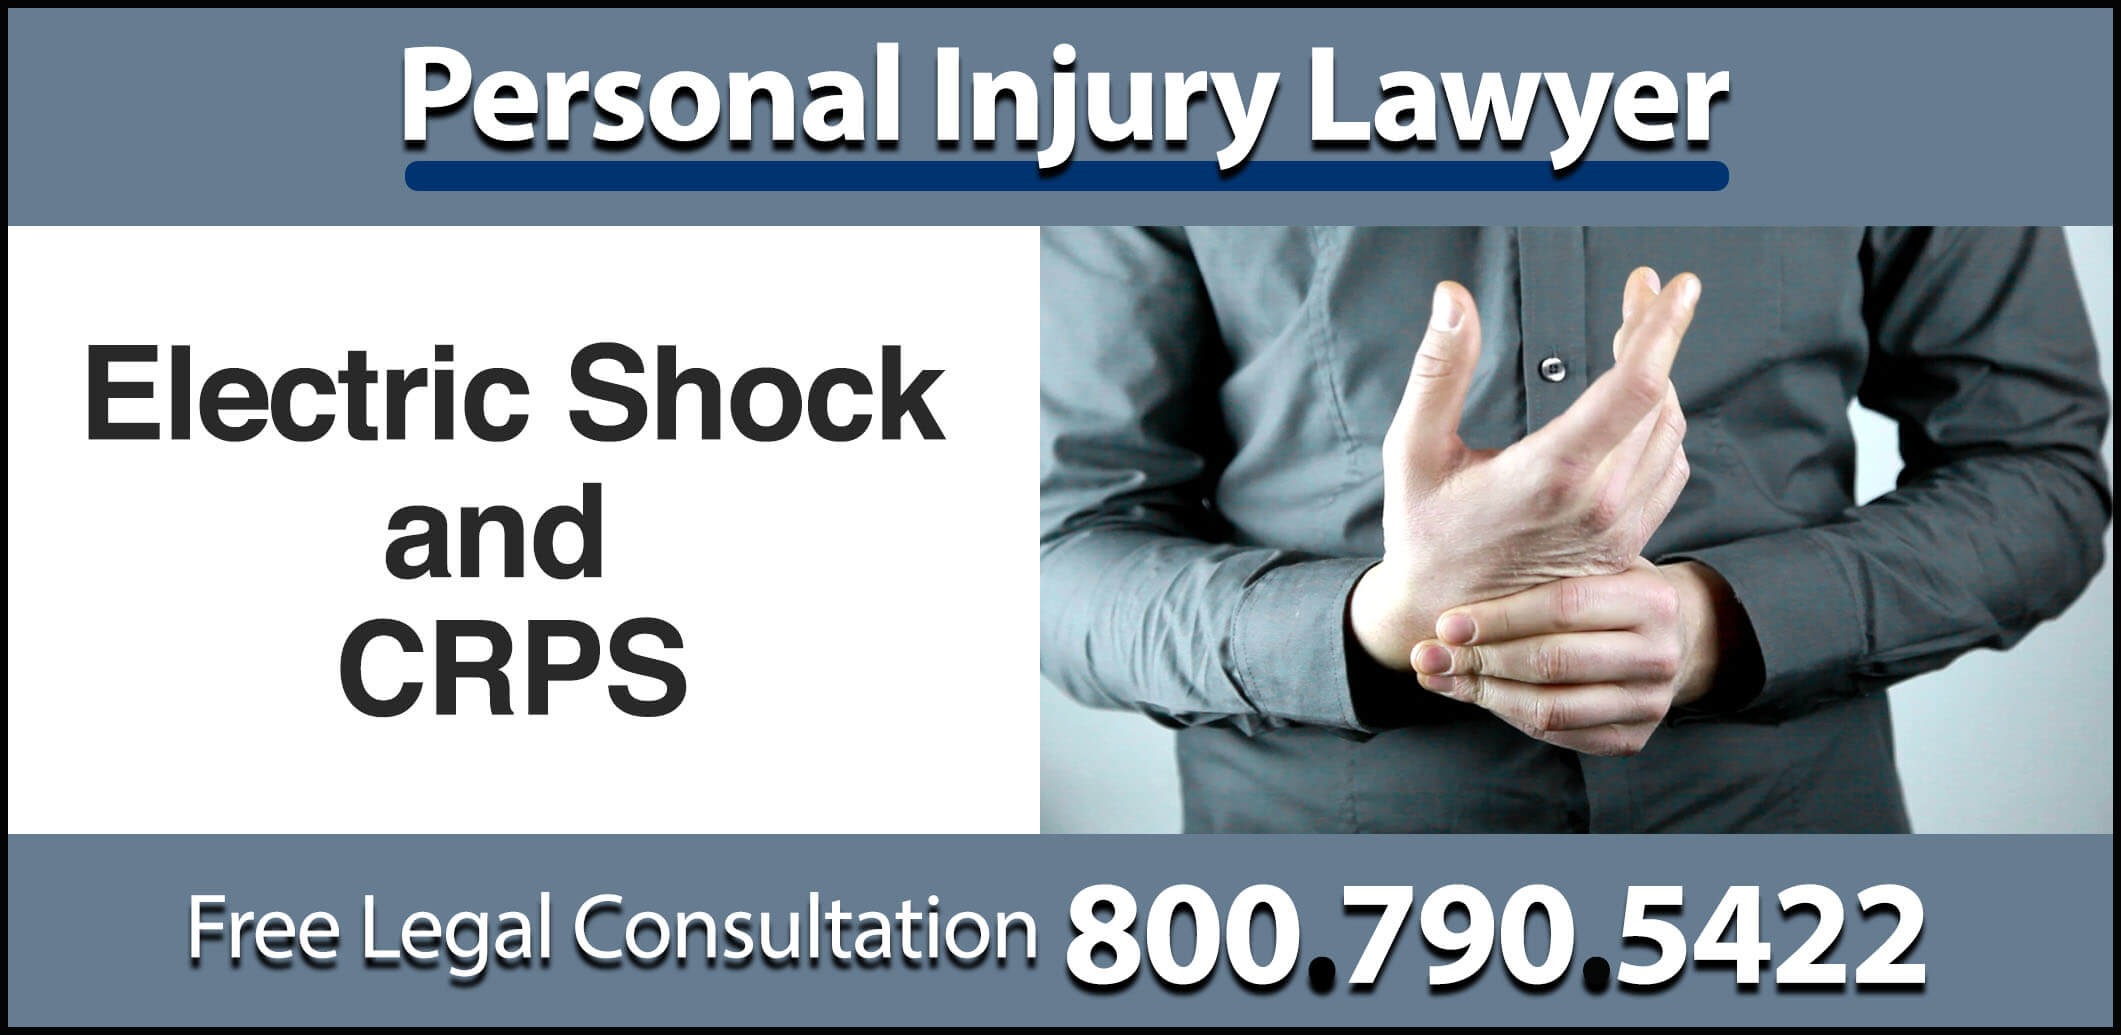 CRPS electric shock complex regional pain syndrome electrocution sue medical expenses pain compensation sue personal injury lawyer attorney los angeles